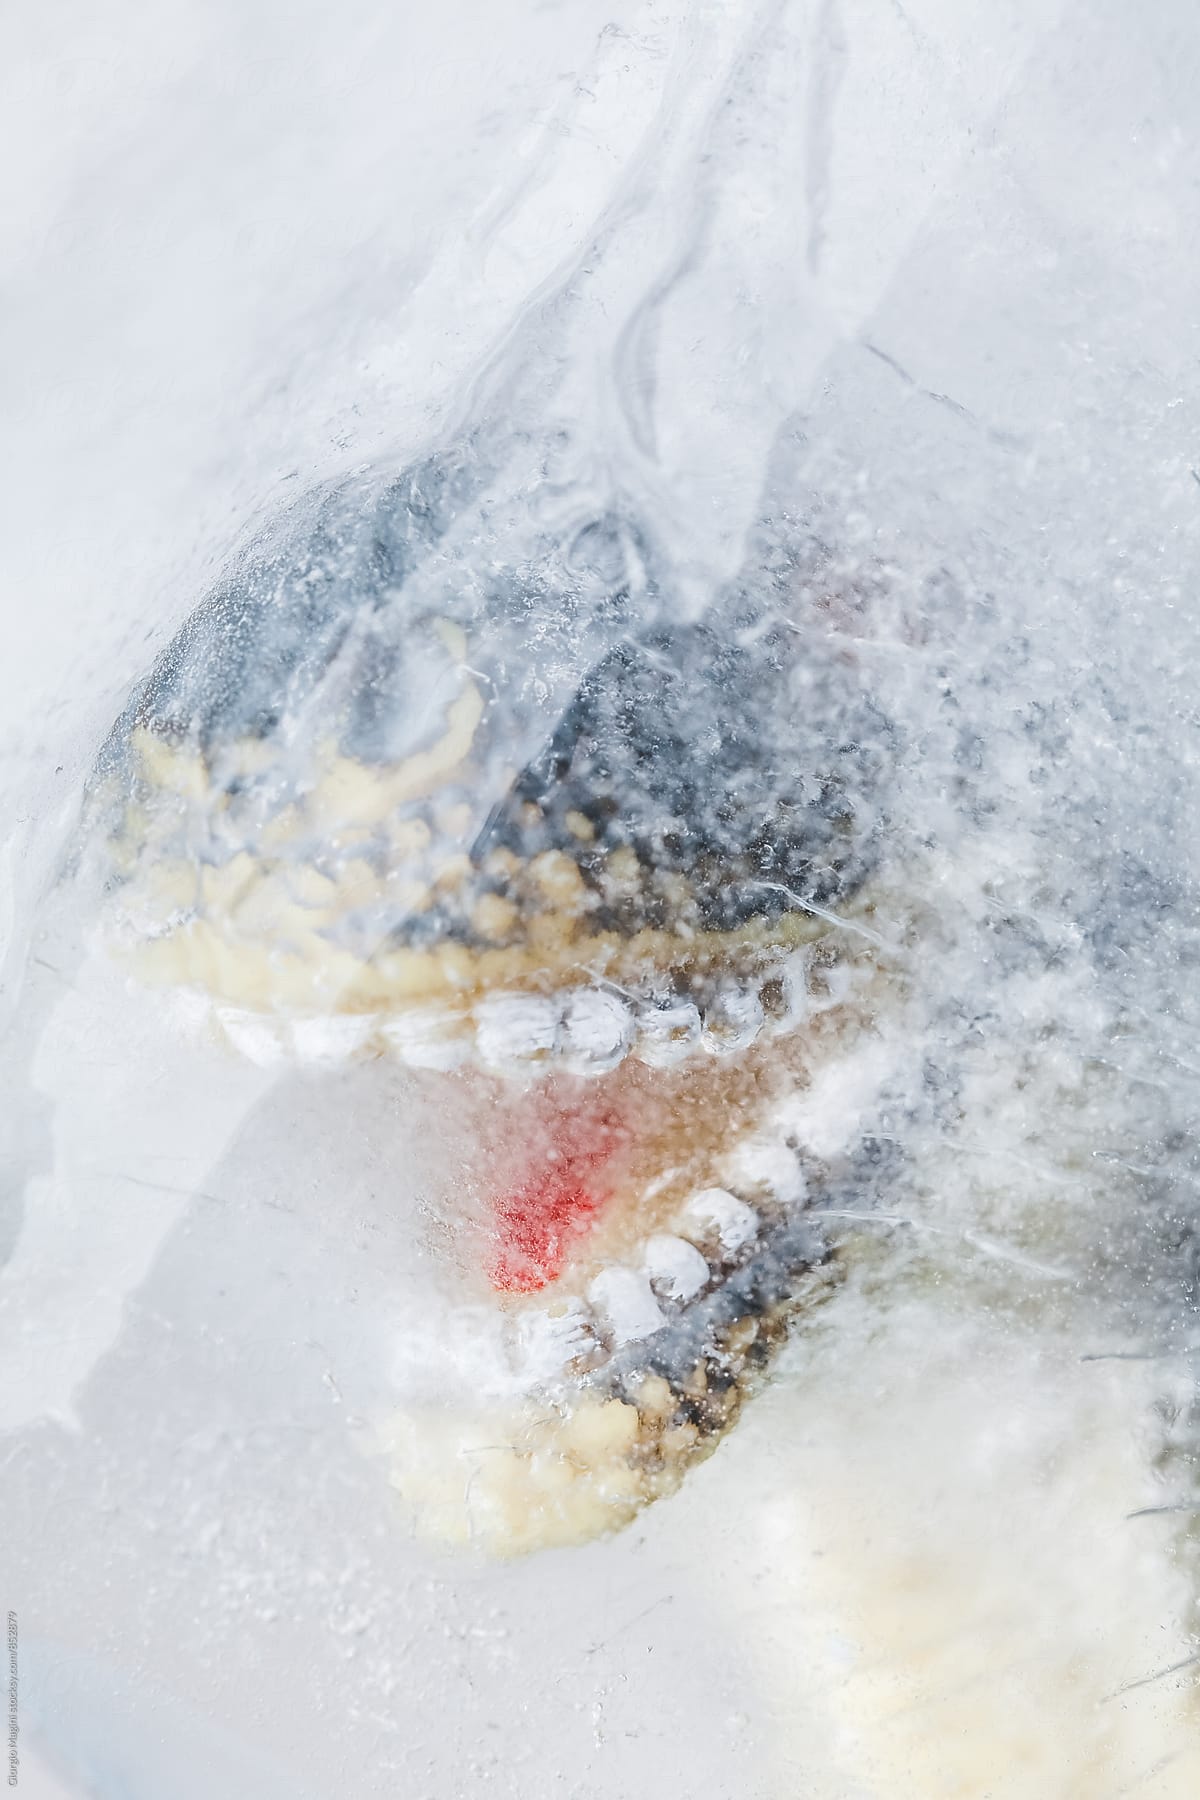 Dinosaur Toy in a Block of Ice